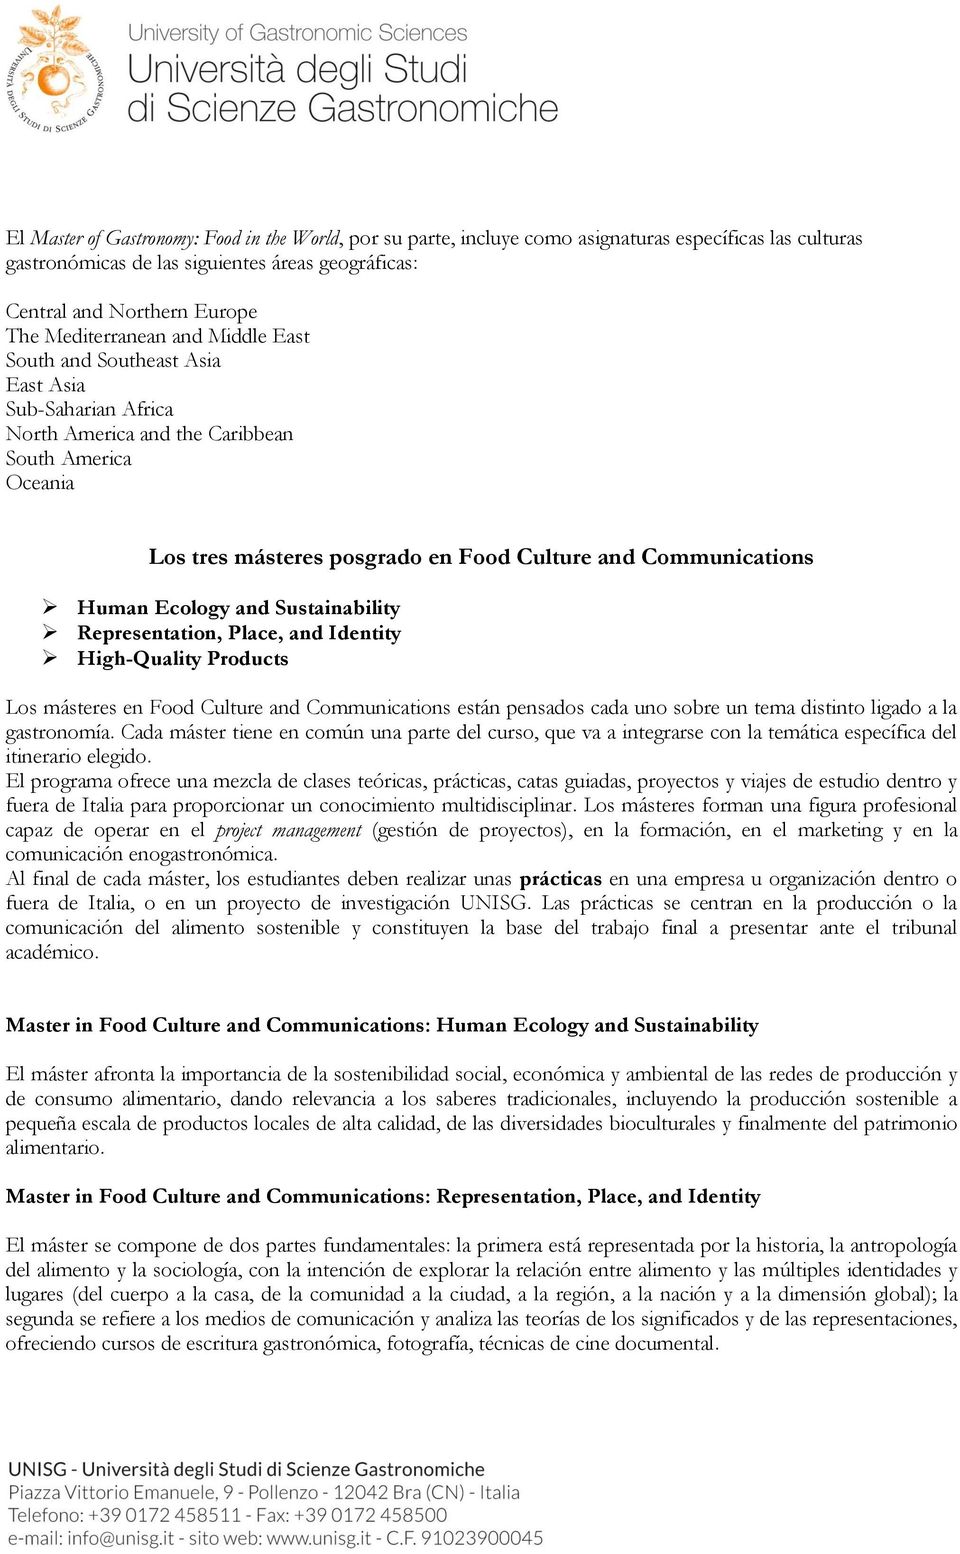 Communications Human Ecology and Sustainability Representation, Place, and Identity High-Quality Products Los másteres en Food Culture and Communications están pensados cada uno sobre un tema